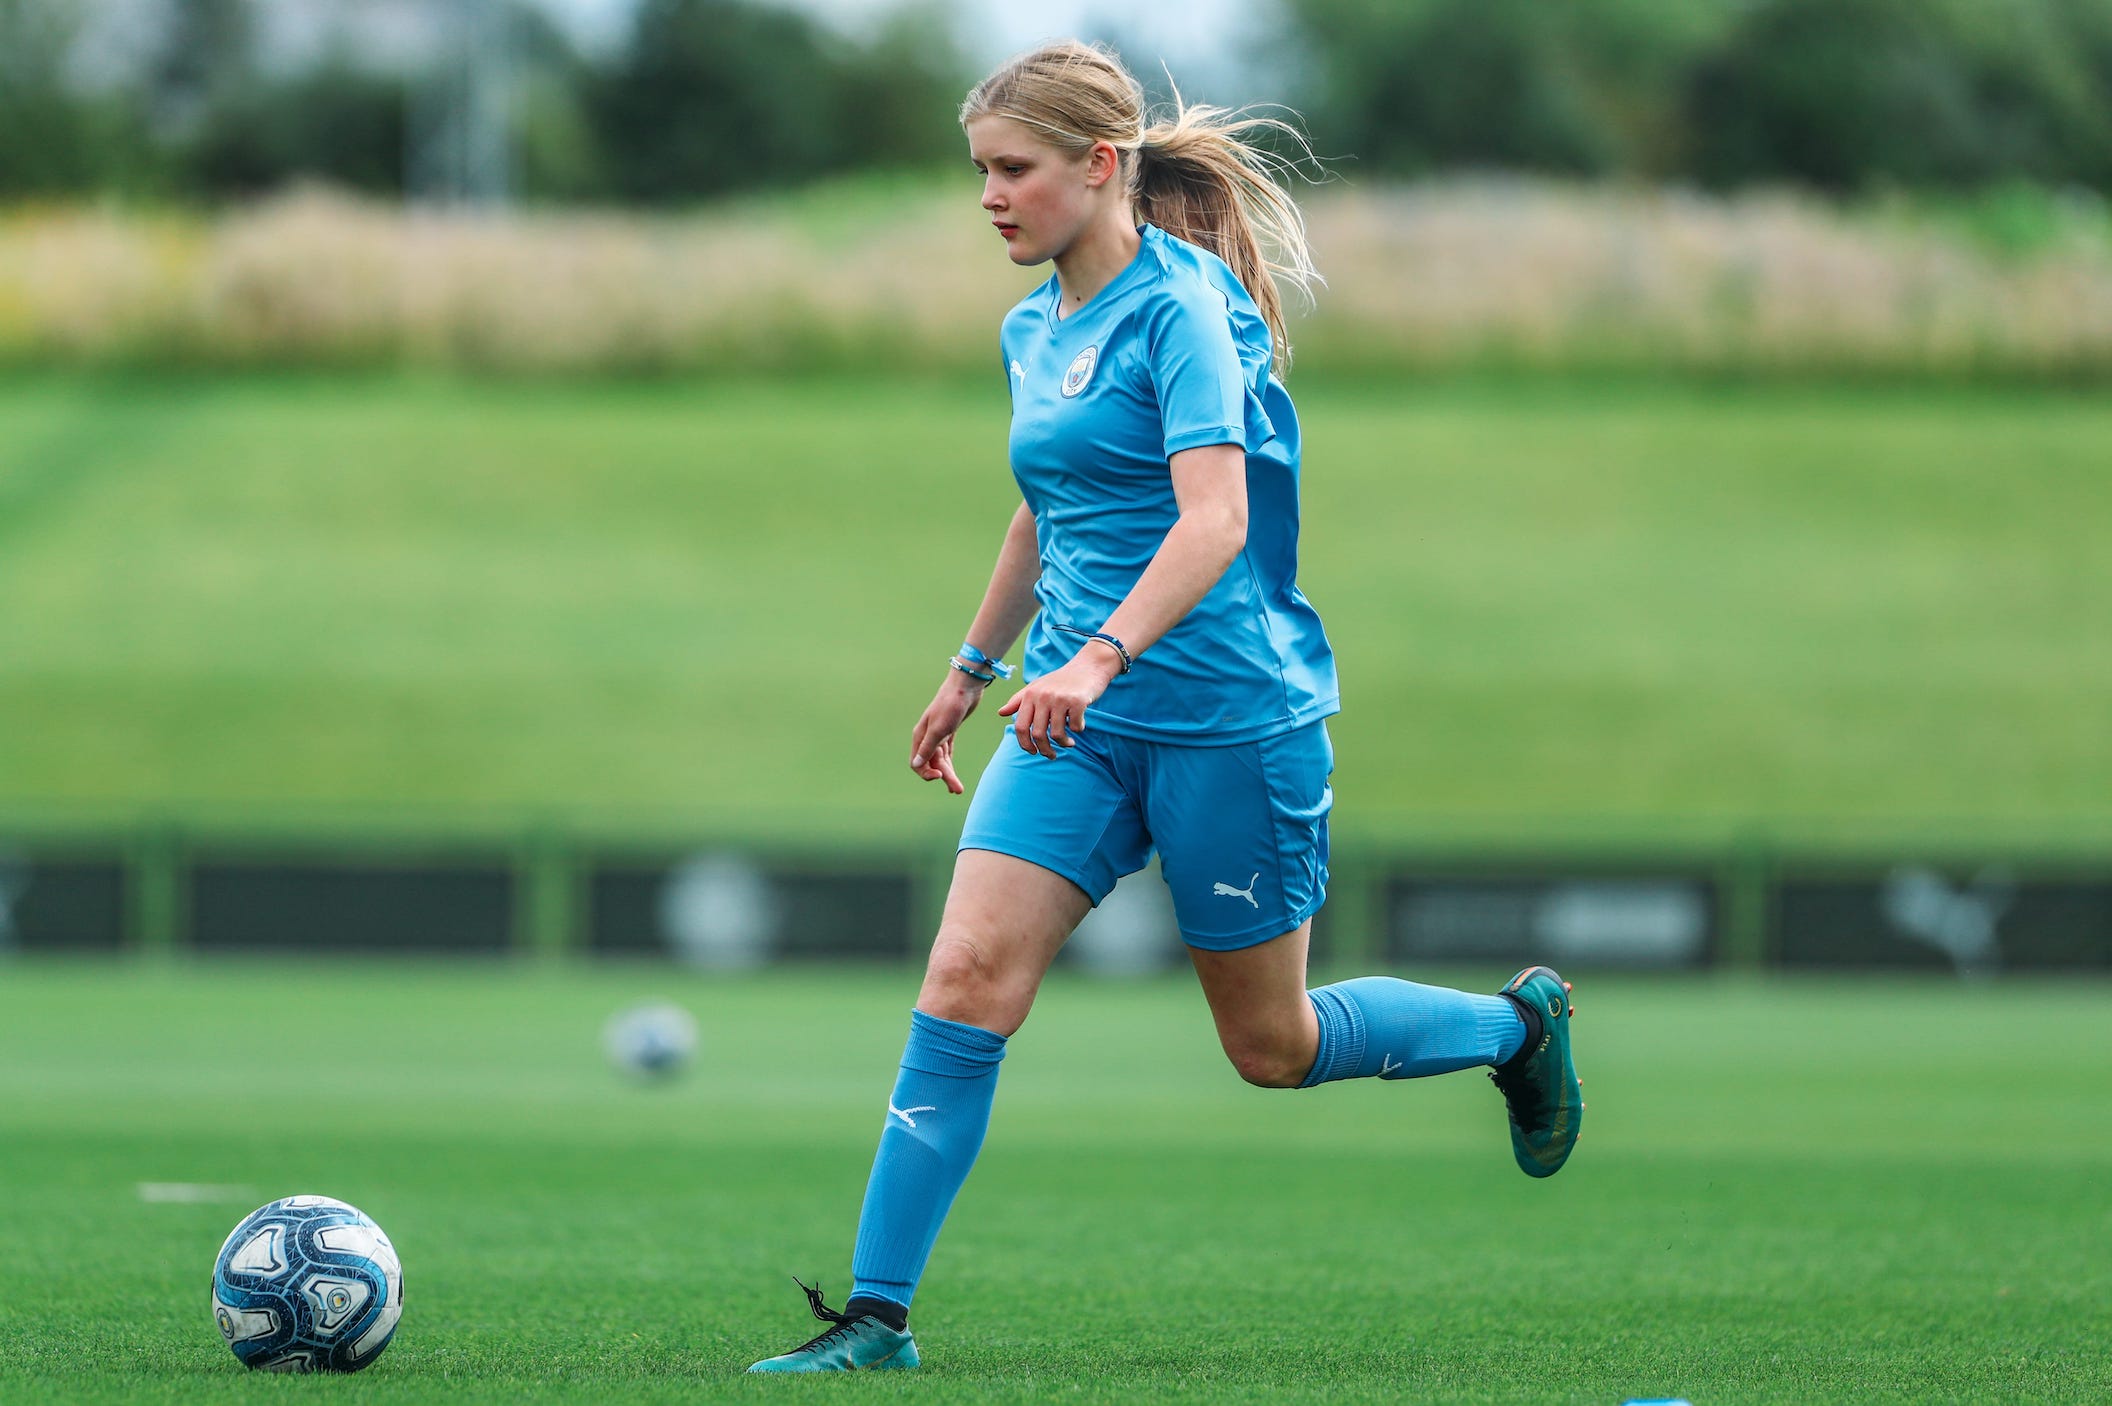 A teenage girl running after a football. She has blonde hair and is wearing a Manchester City Football School kit.